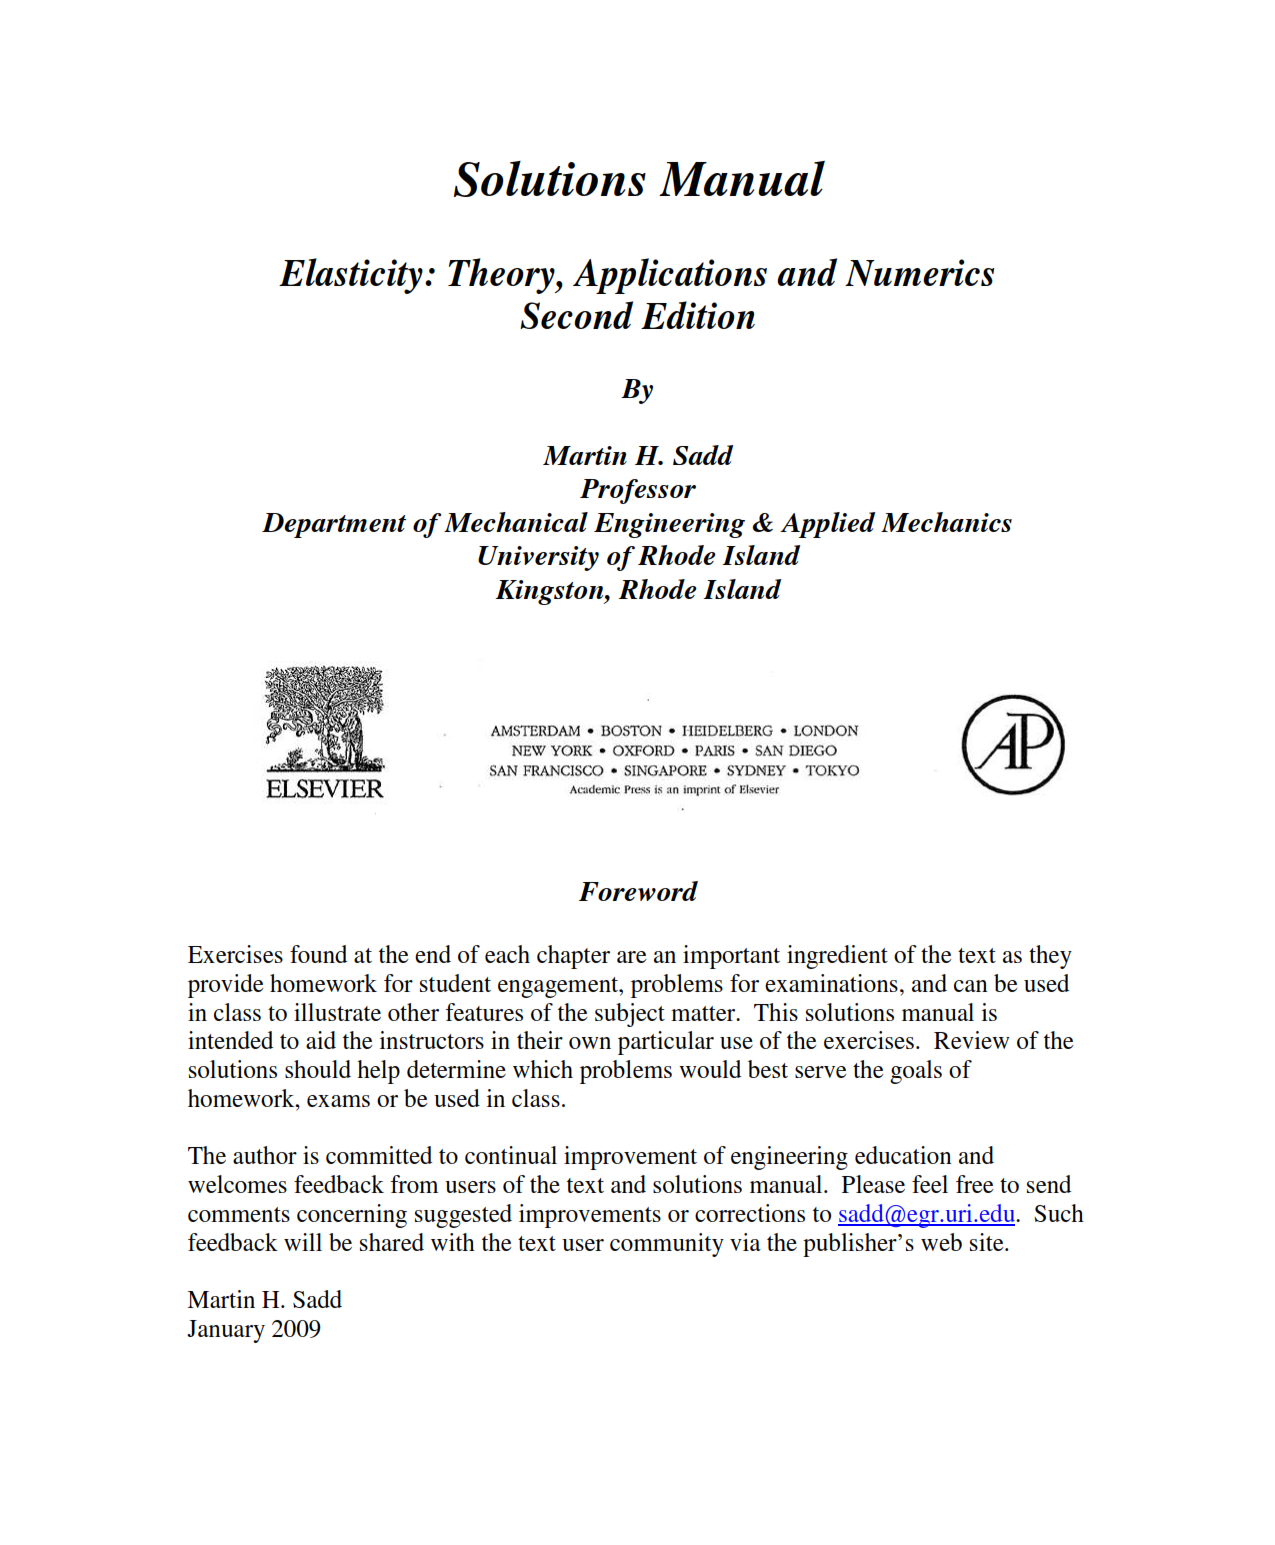 download free Elasticity theory applications and numerics 2nd edition written by Sadd solution manual eBook pdf